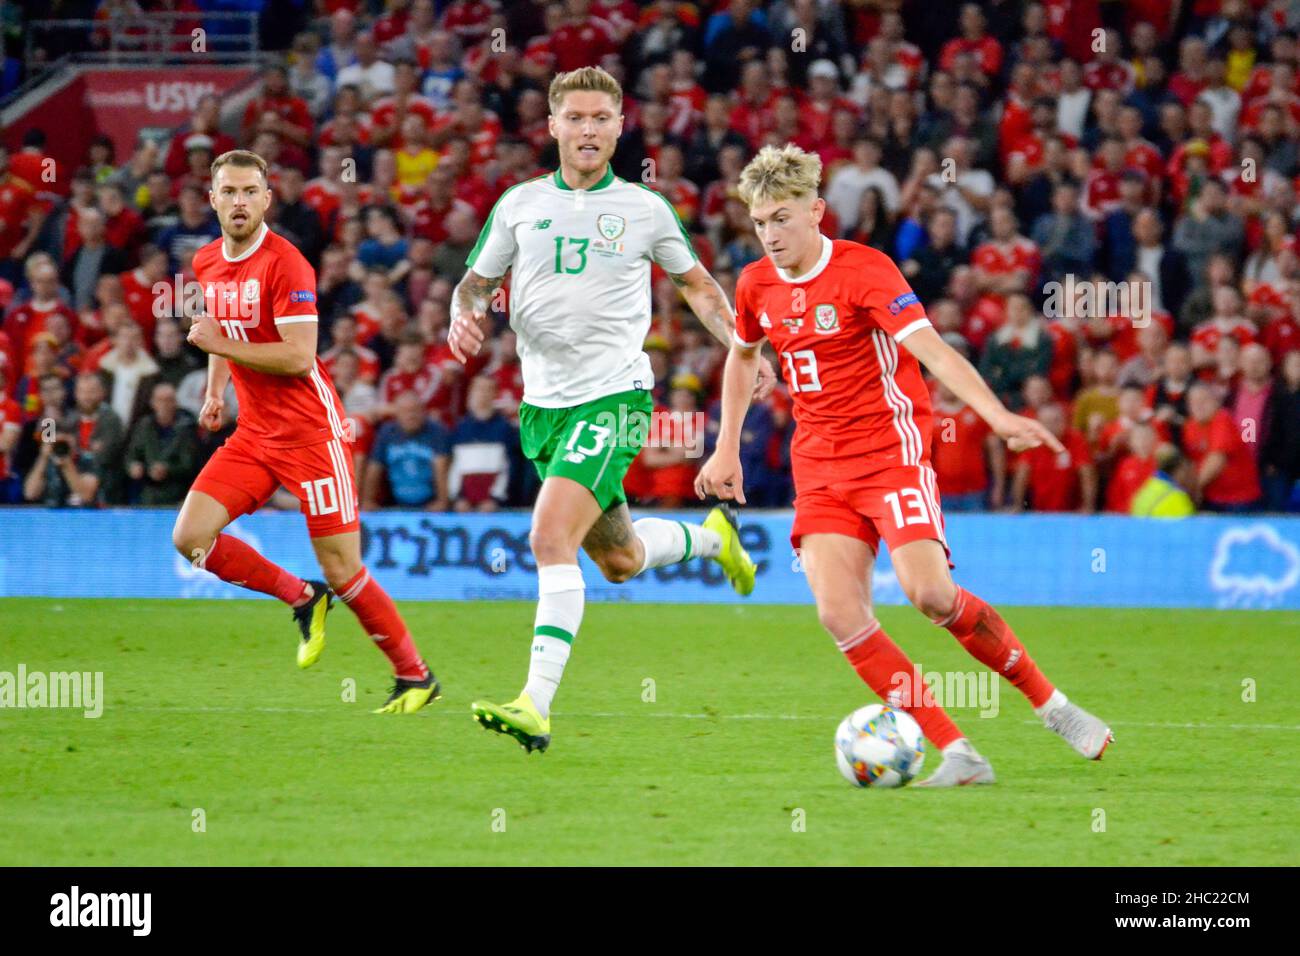 Cardiff, Wales. 6 September, 2018. David Brooks of Wales under pressure from Jeff Hendrick of Republic of Ireland during the UEFA Nations League Group B4 game between Wales and Republic of Ireland at the Cardiff City Stadium in Cardiff, Wales, UK on 6 September 2018. Credit: Duncan Thomas/Majestic Media. Stock Photo